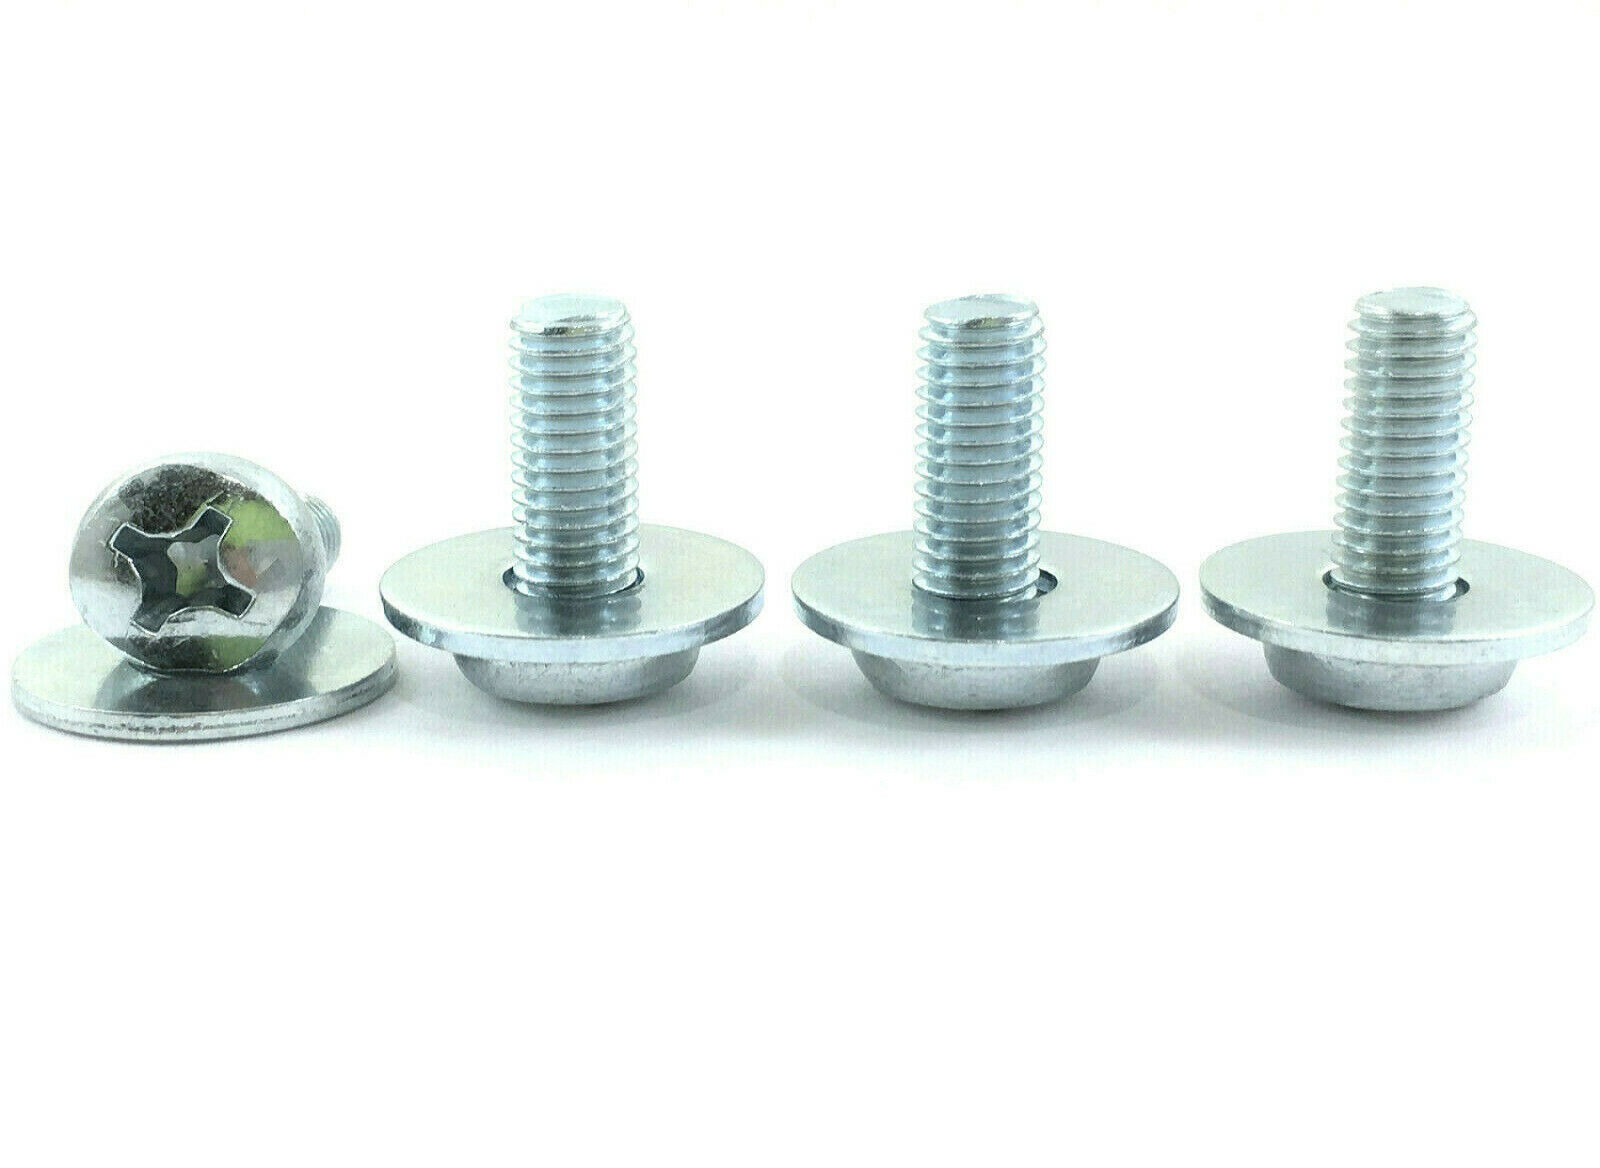 Primary image for Sony Wall Mount Mounting Screws for KLV-S26A10E, KLV-S26A10W, KLV-S32A10E